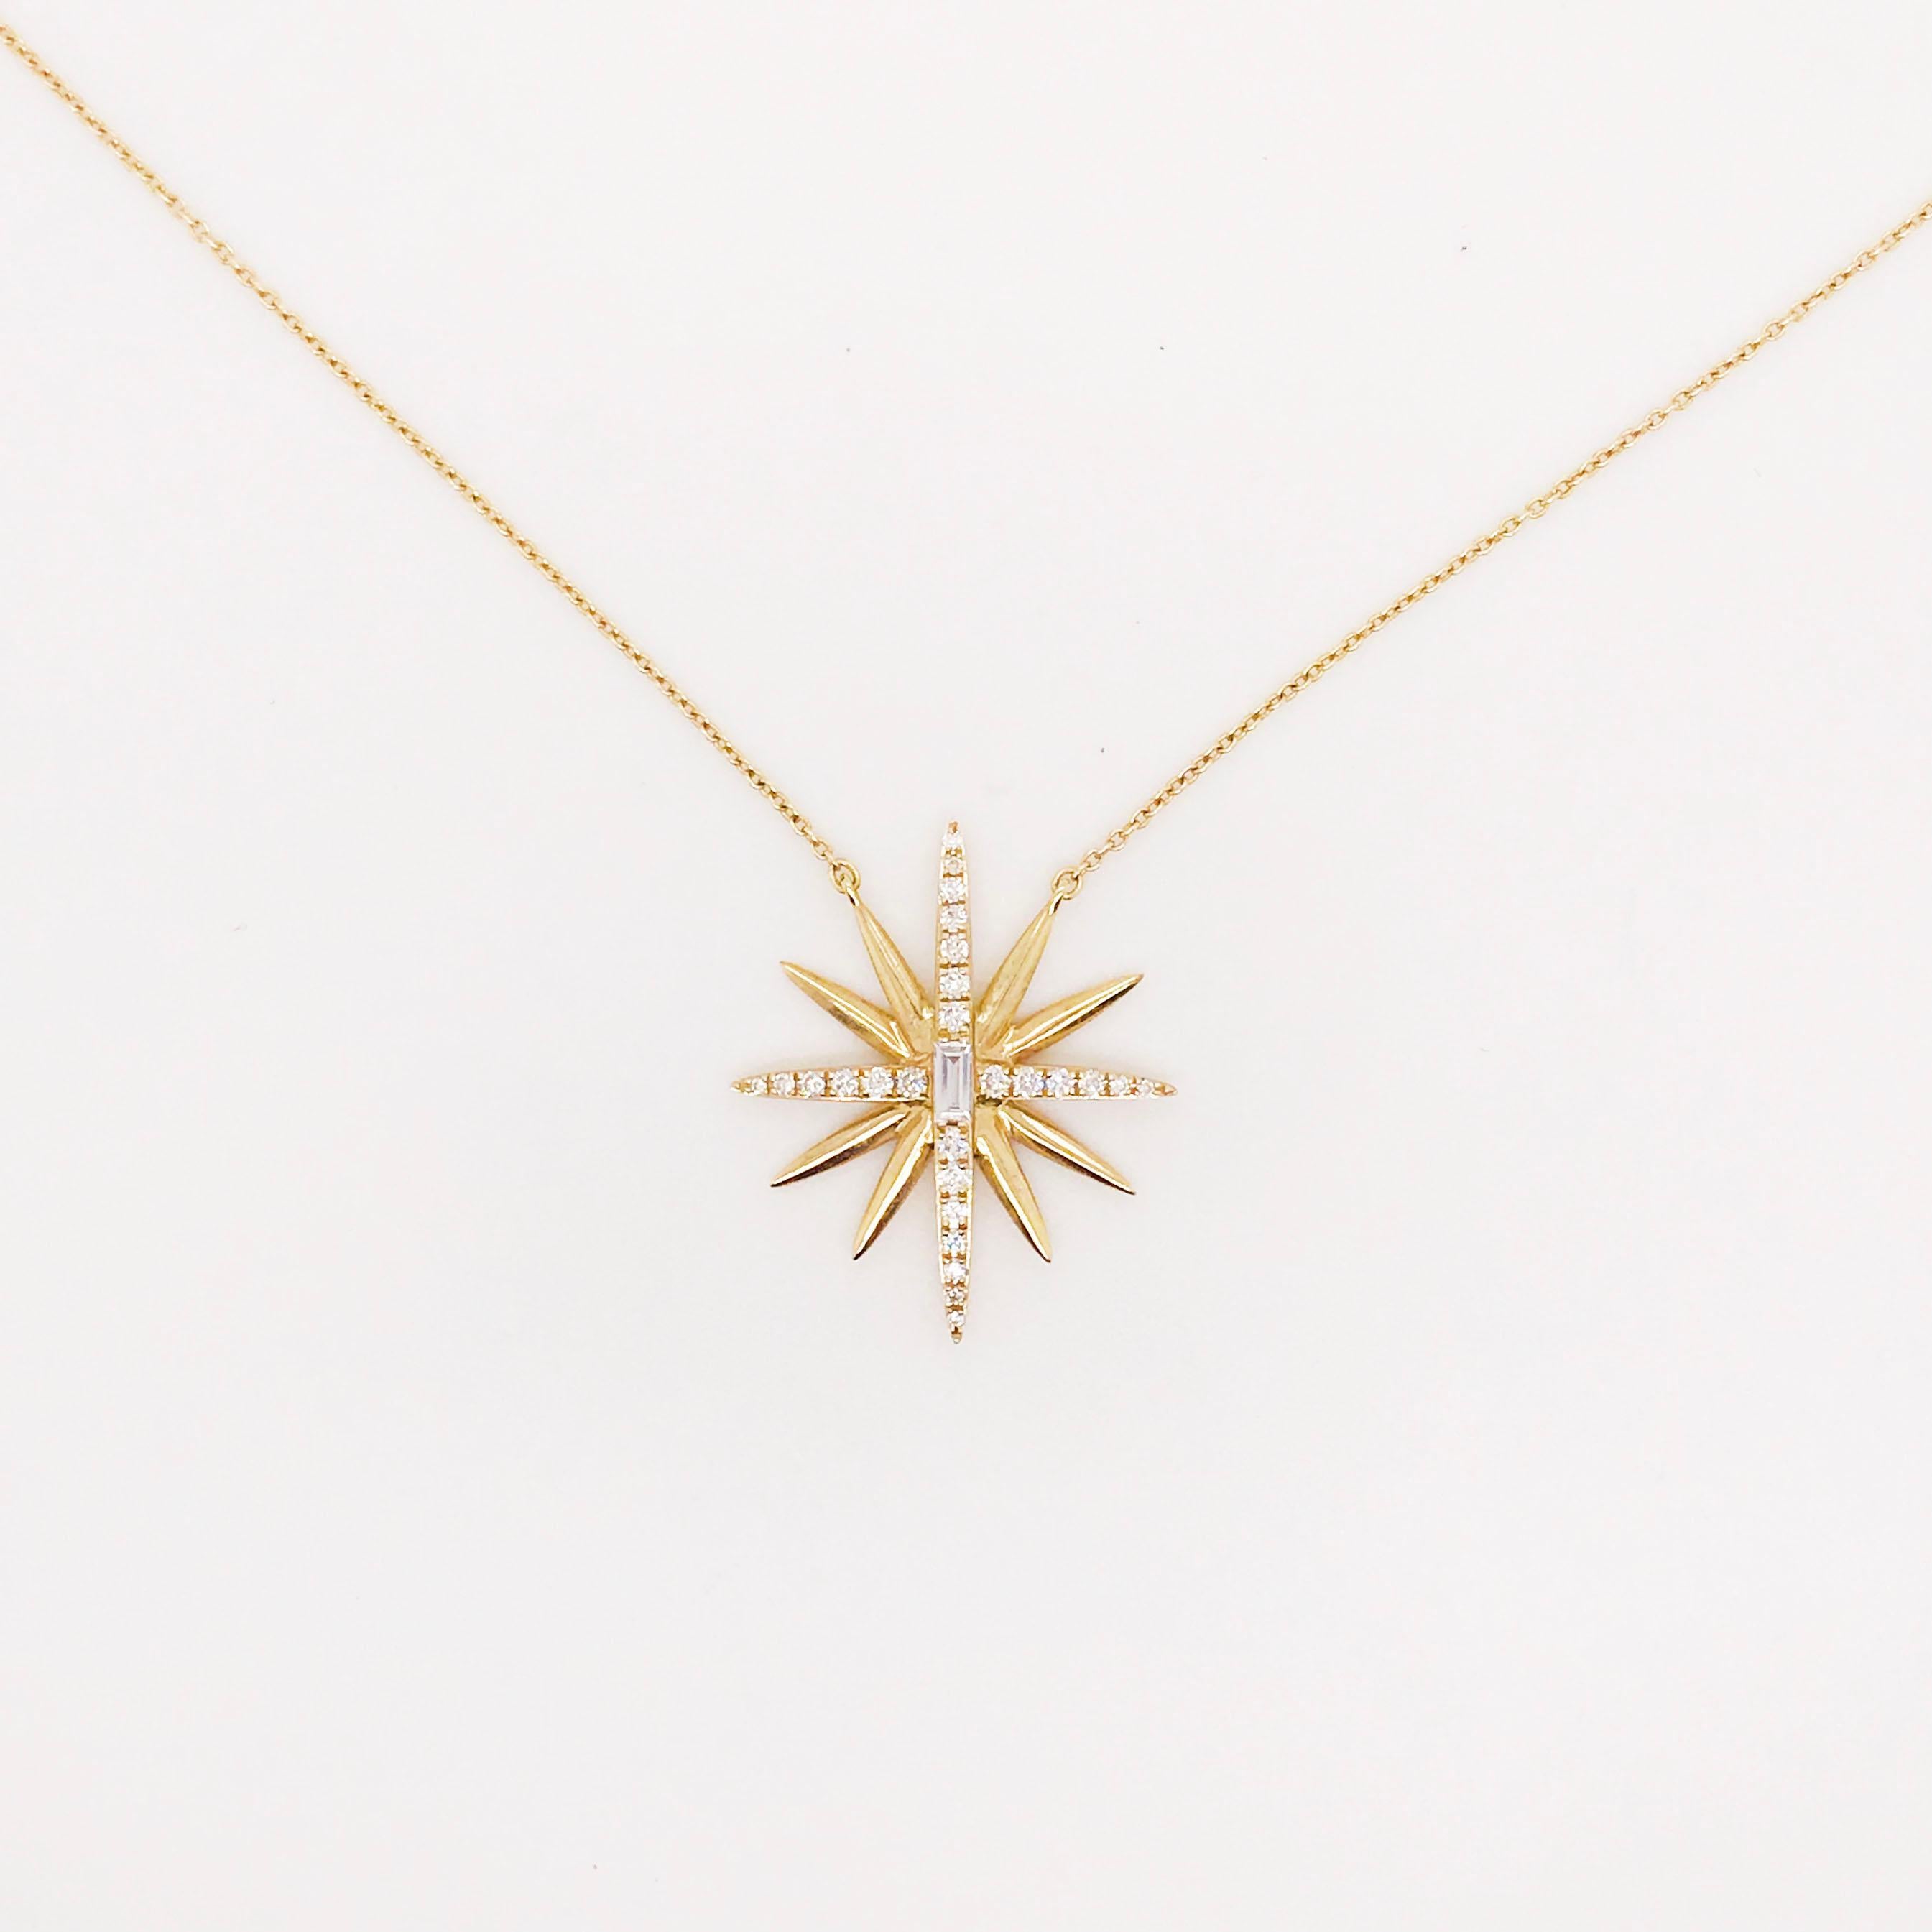 This diamond starburst designer necklace is bold and beautiful! Made in 14K gold with genuine, natural diamonds. The necklace has a starburst pendant design with a baguette diamond set in the center, surrounded by round brilliant diamonds! The